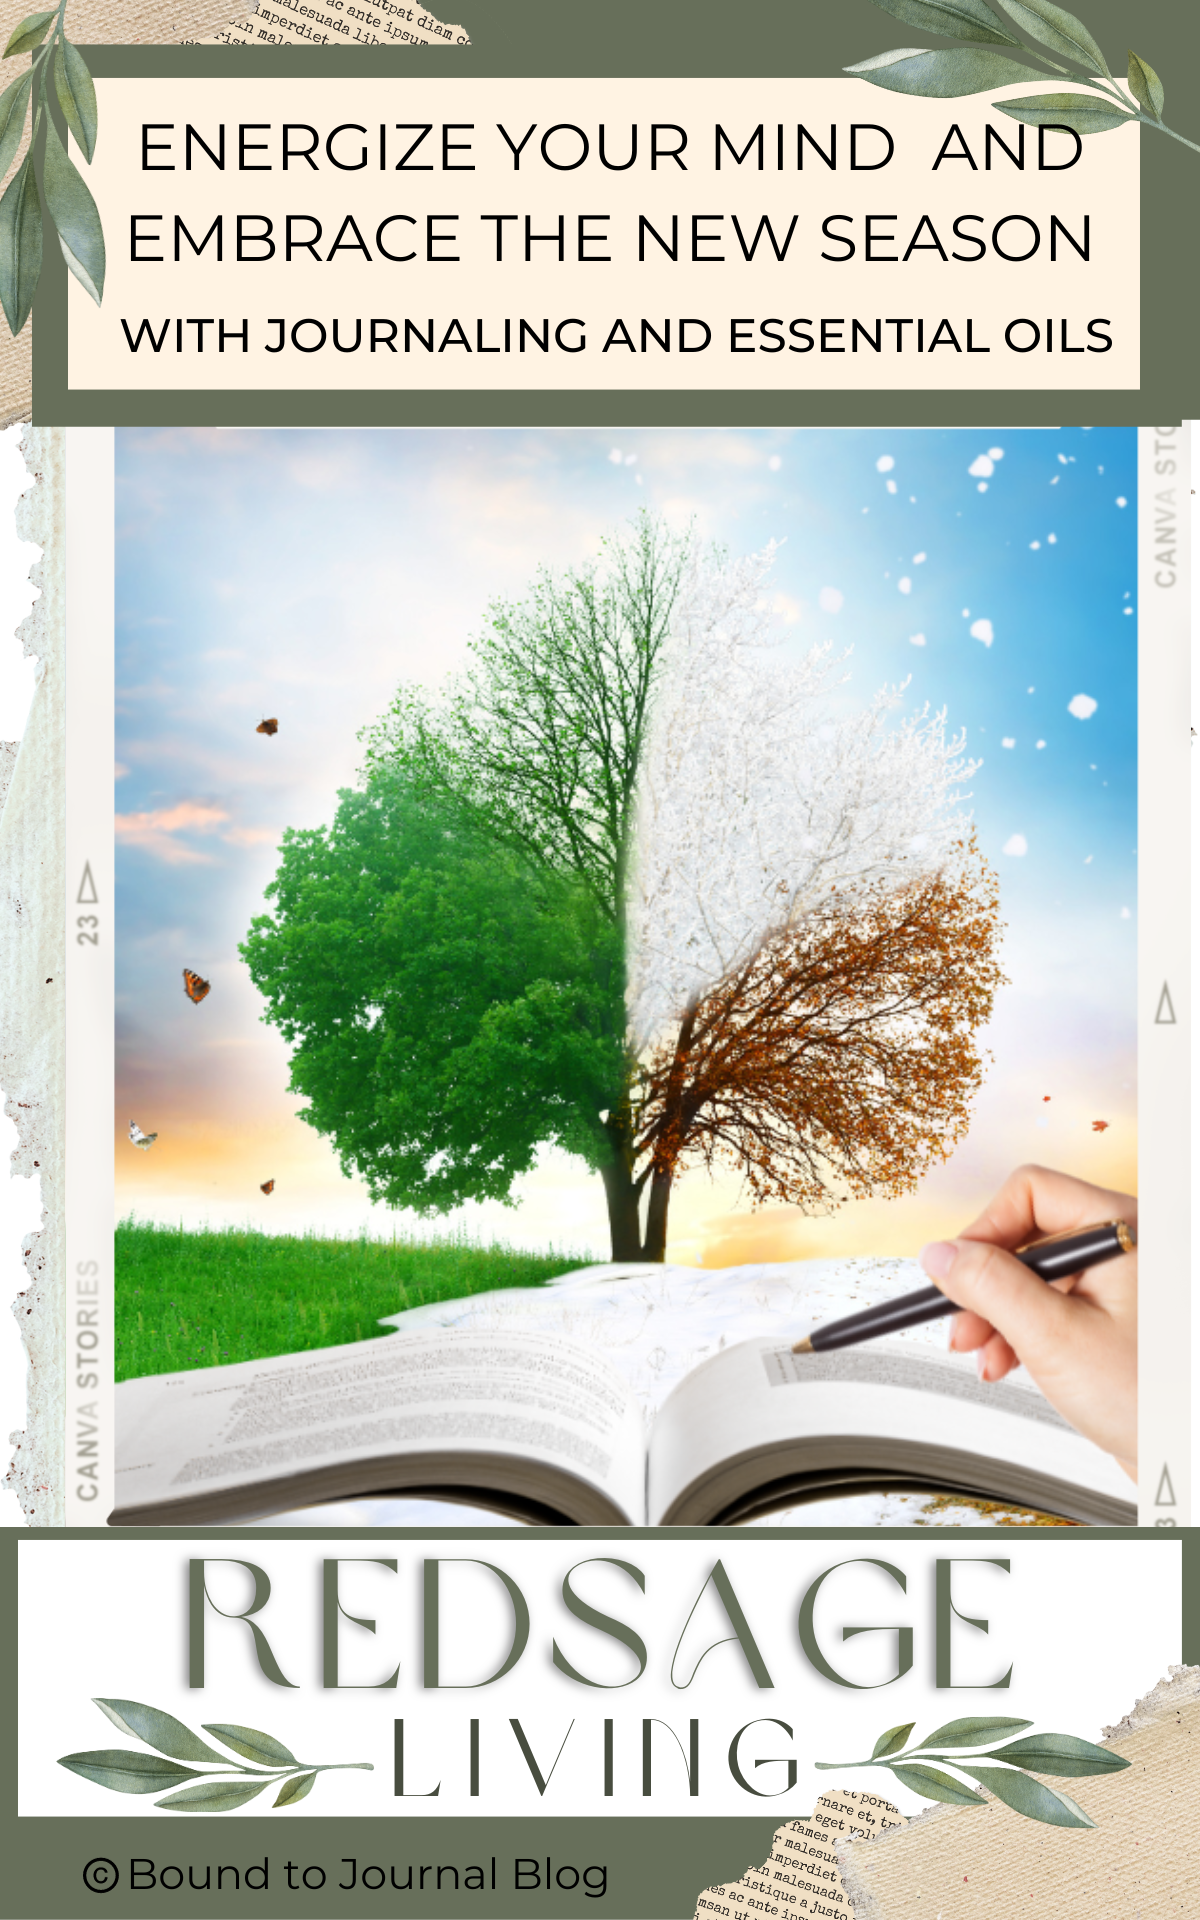 Tree changing seasons, journal open and hand writing in the journal for post titled Energize Your Mind and Embrace the New Season with Journaling and Essential Oils